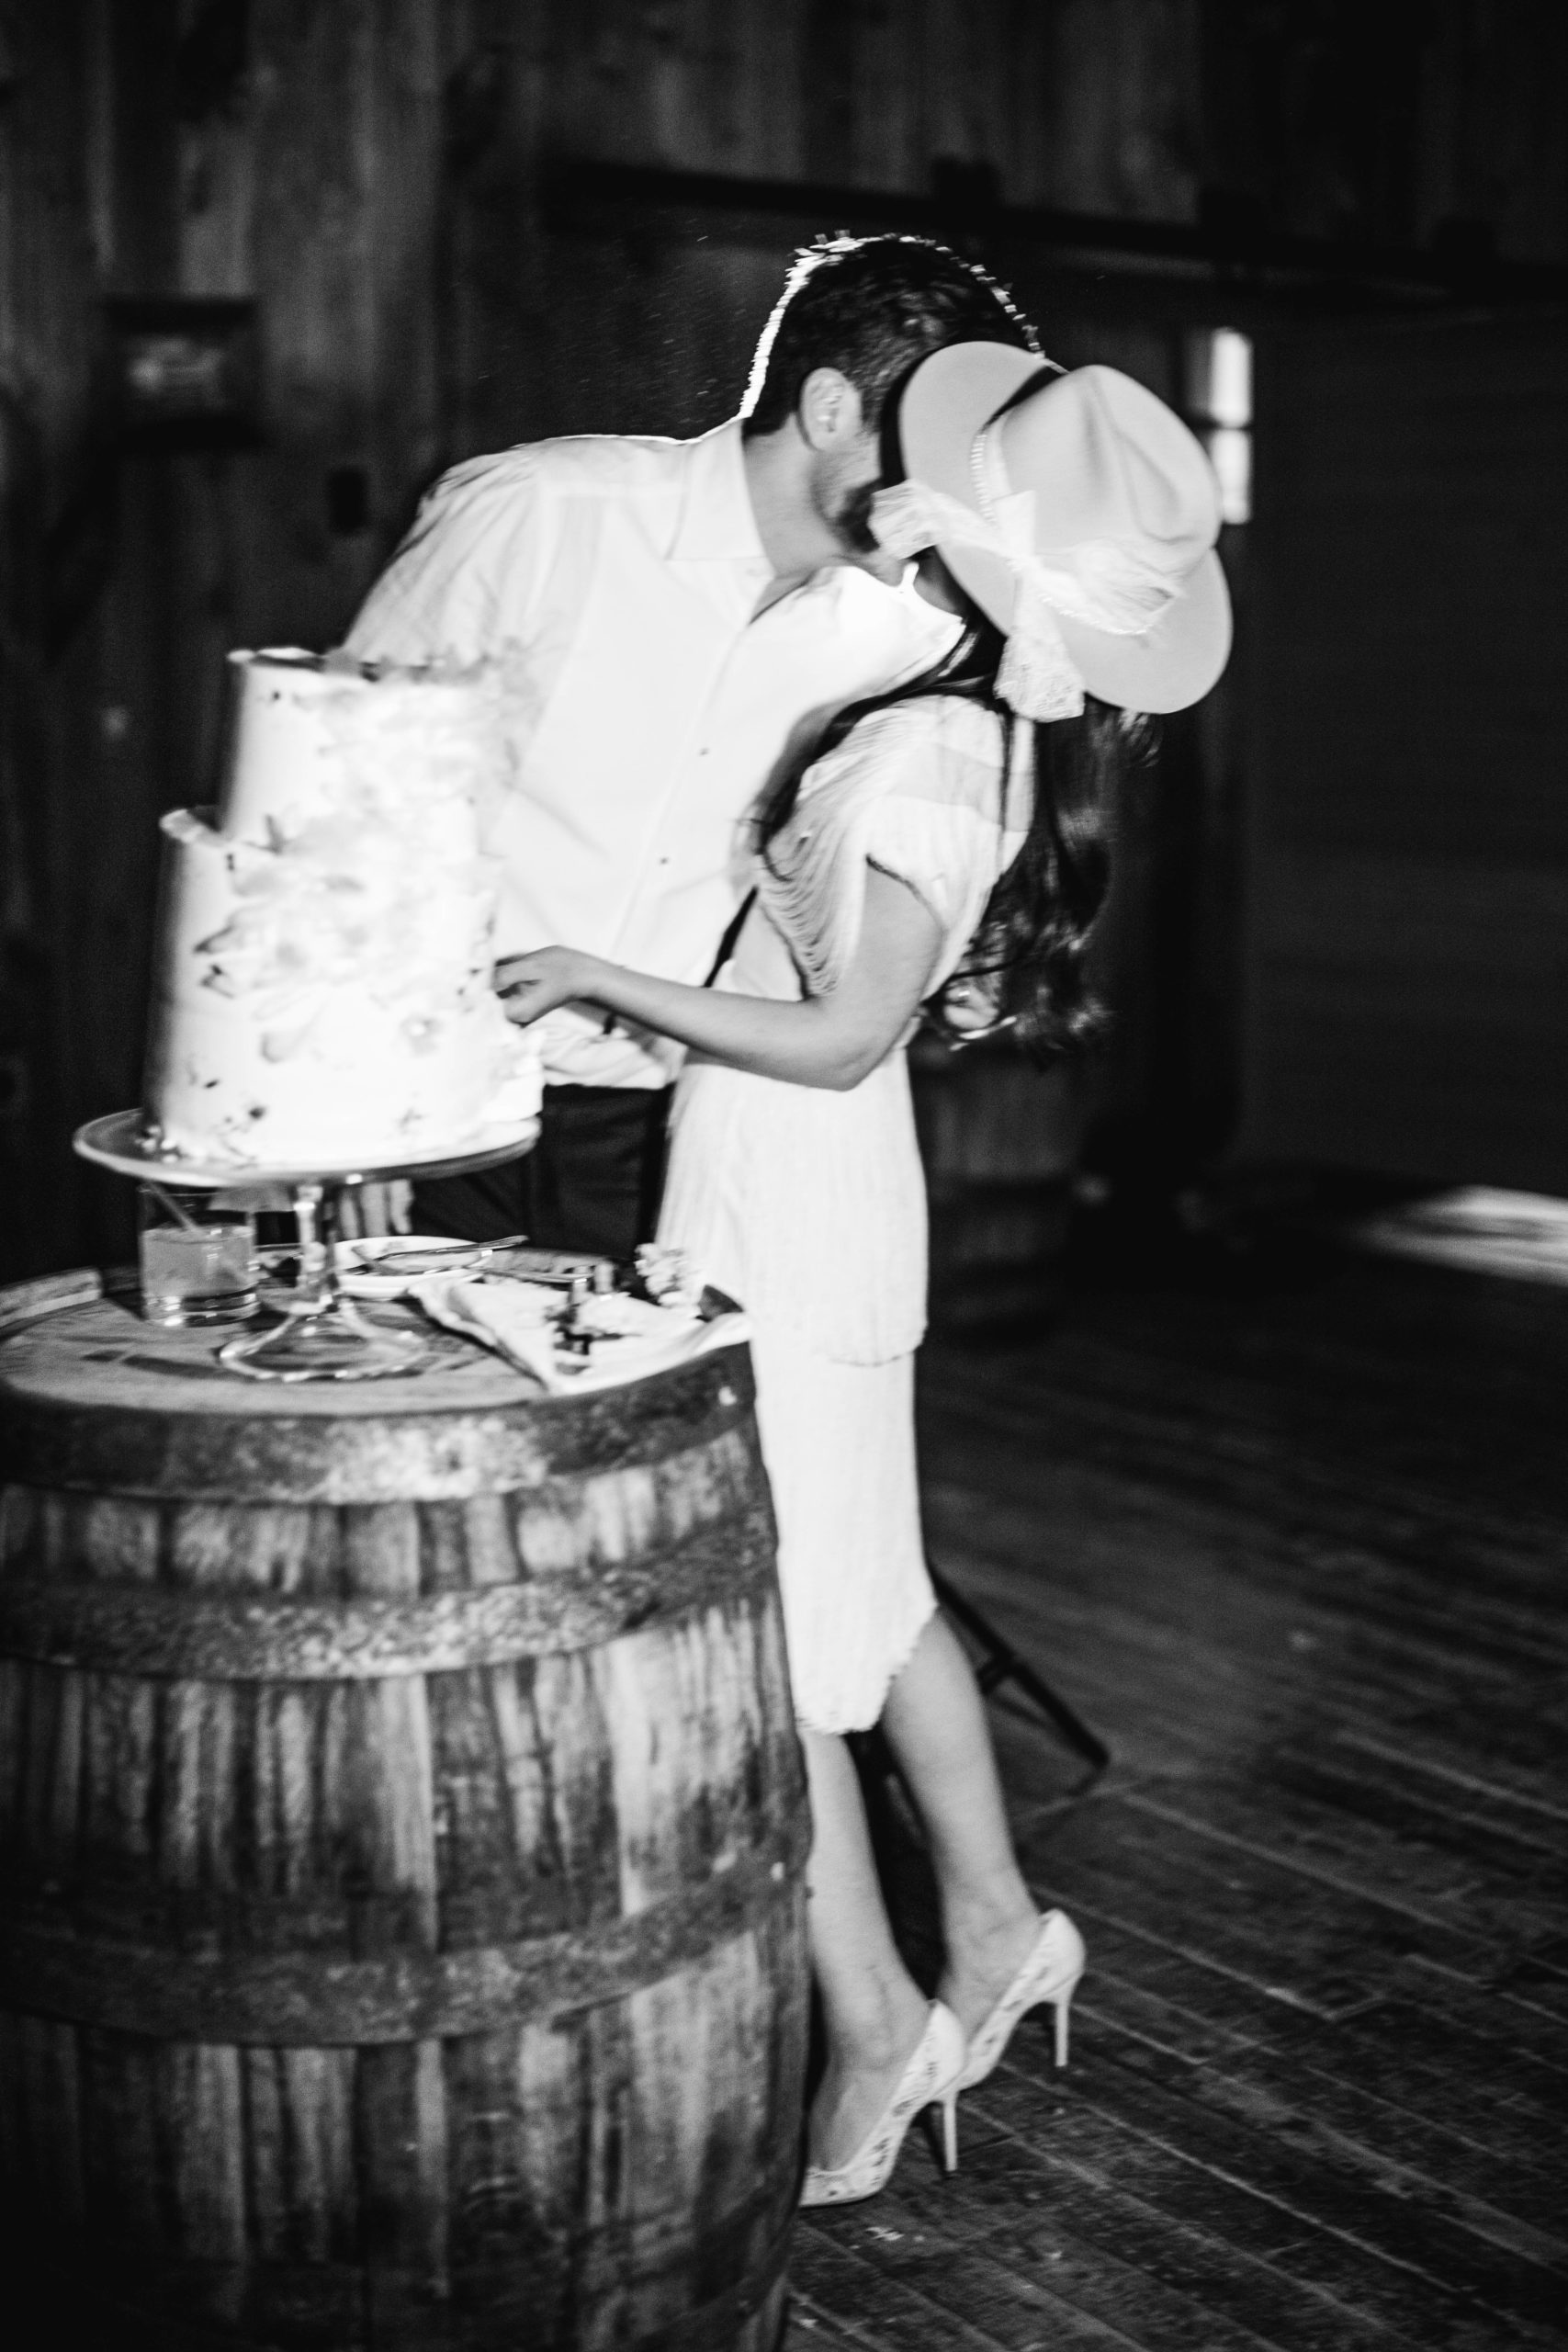 bride and groom kiss while cutting their cake at their utah ranch wedding. the bride wears a vintage wedding reception dress and white bridal hat. photo by megan robinson photography